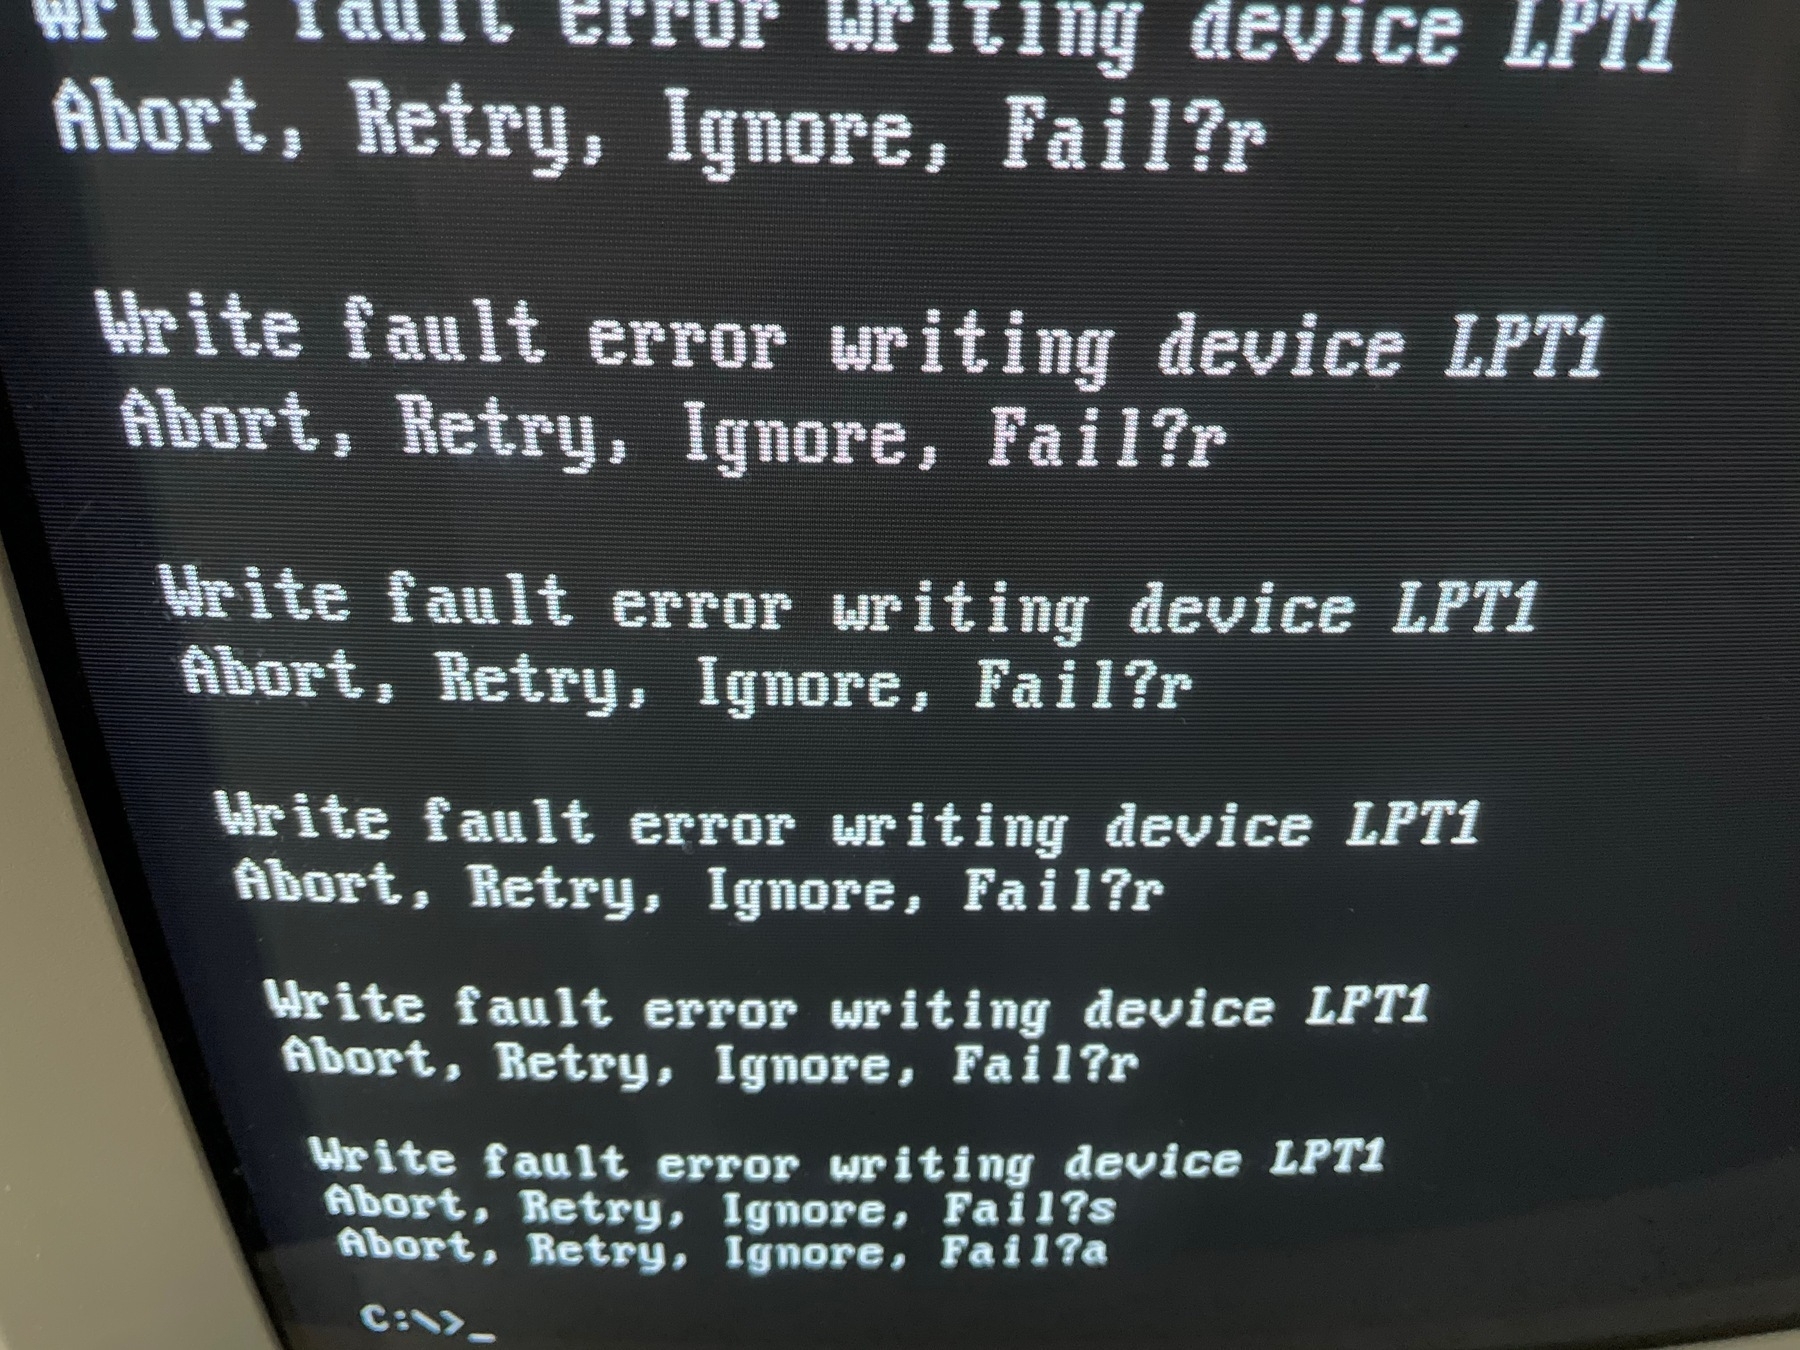 A view of failure from the computer